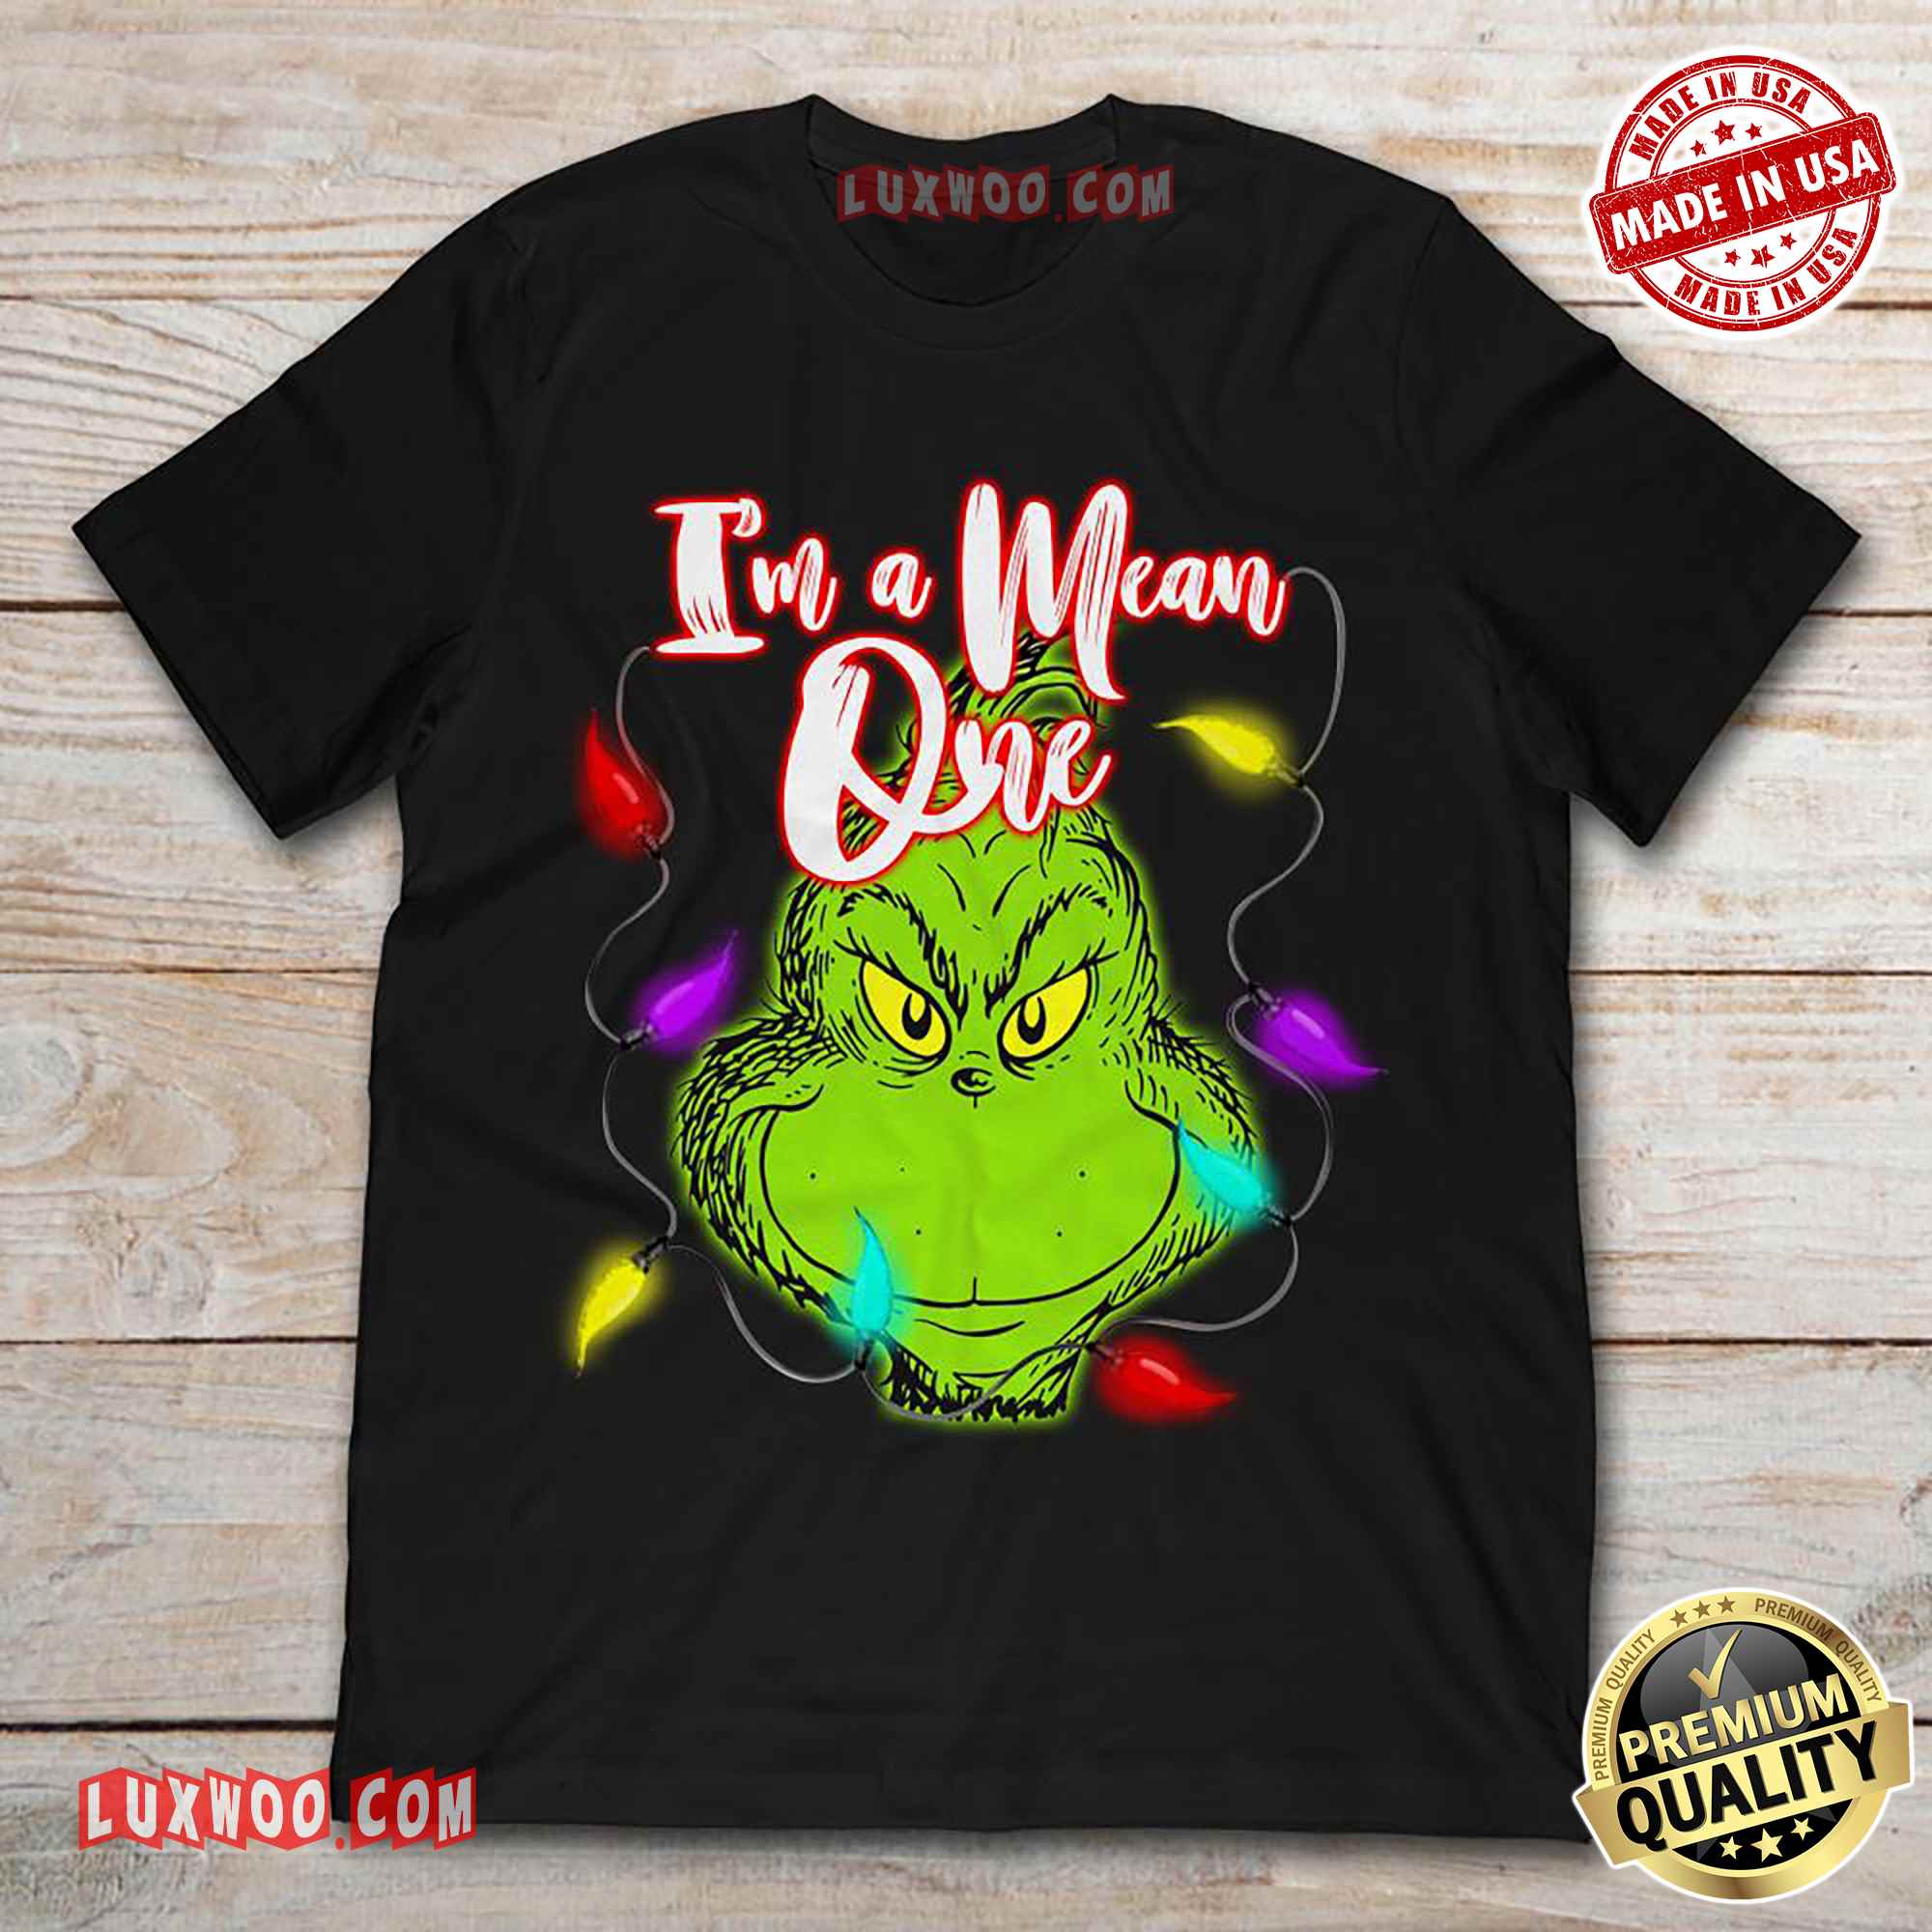 Grinch With Light Im A Mean One Christmas Shirt - Luxwoo.com